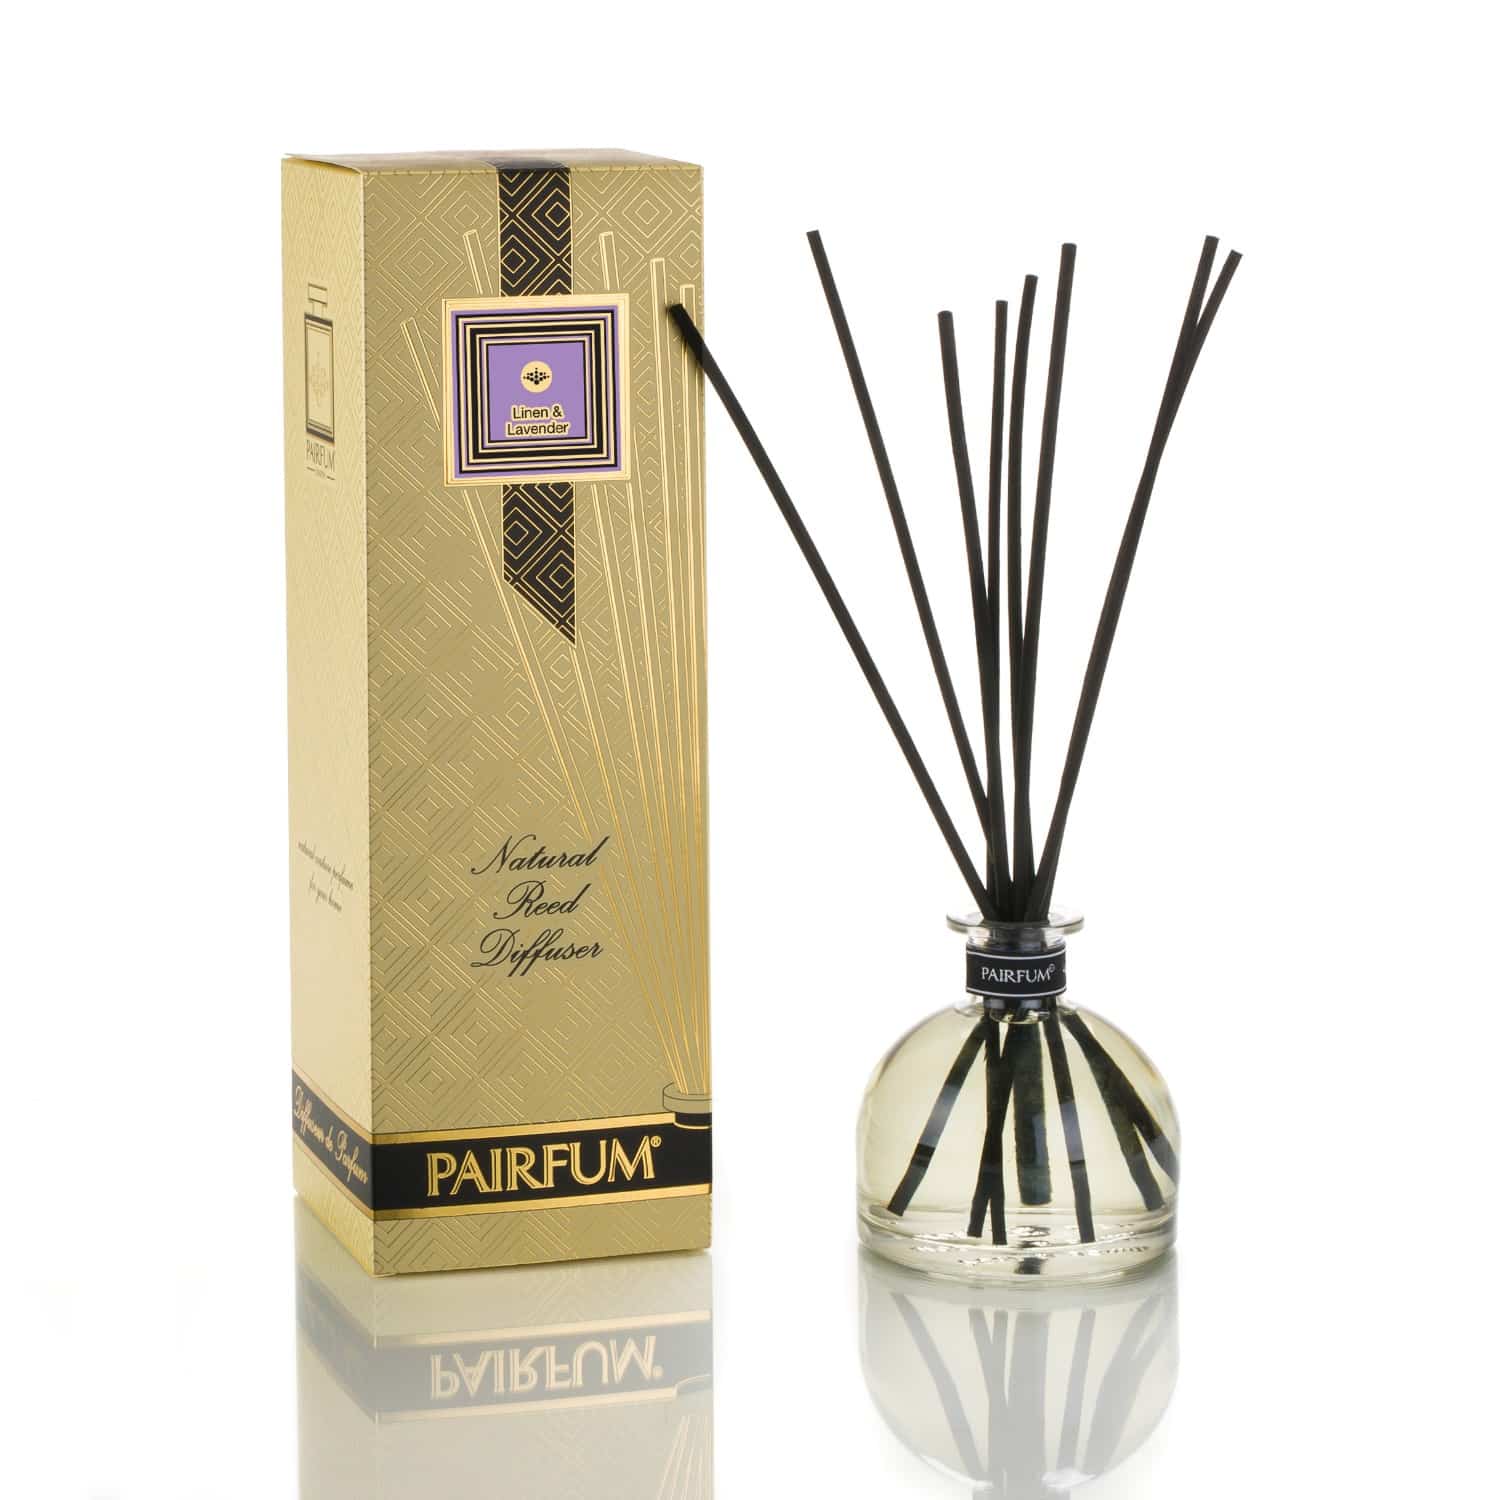 Pairfum Large Bell Signature Linen Lavender benefits of reed diffusers